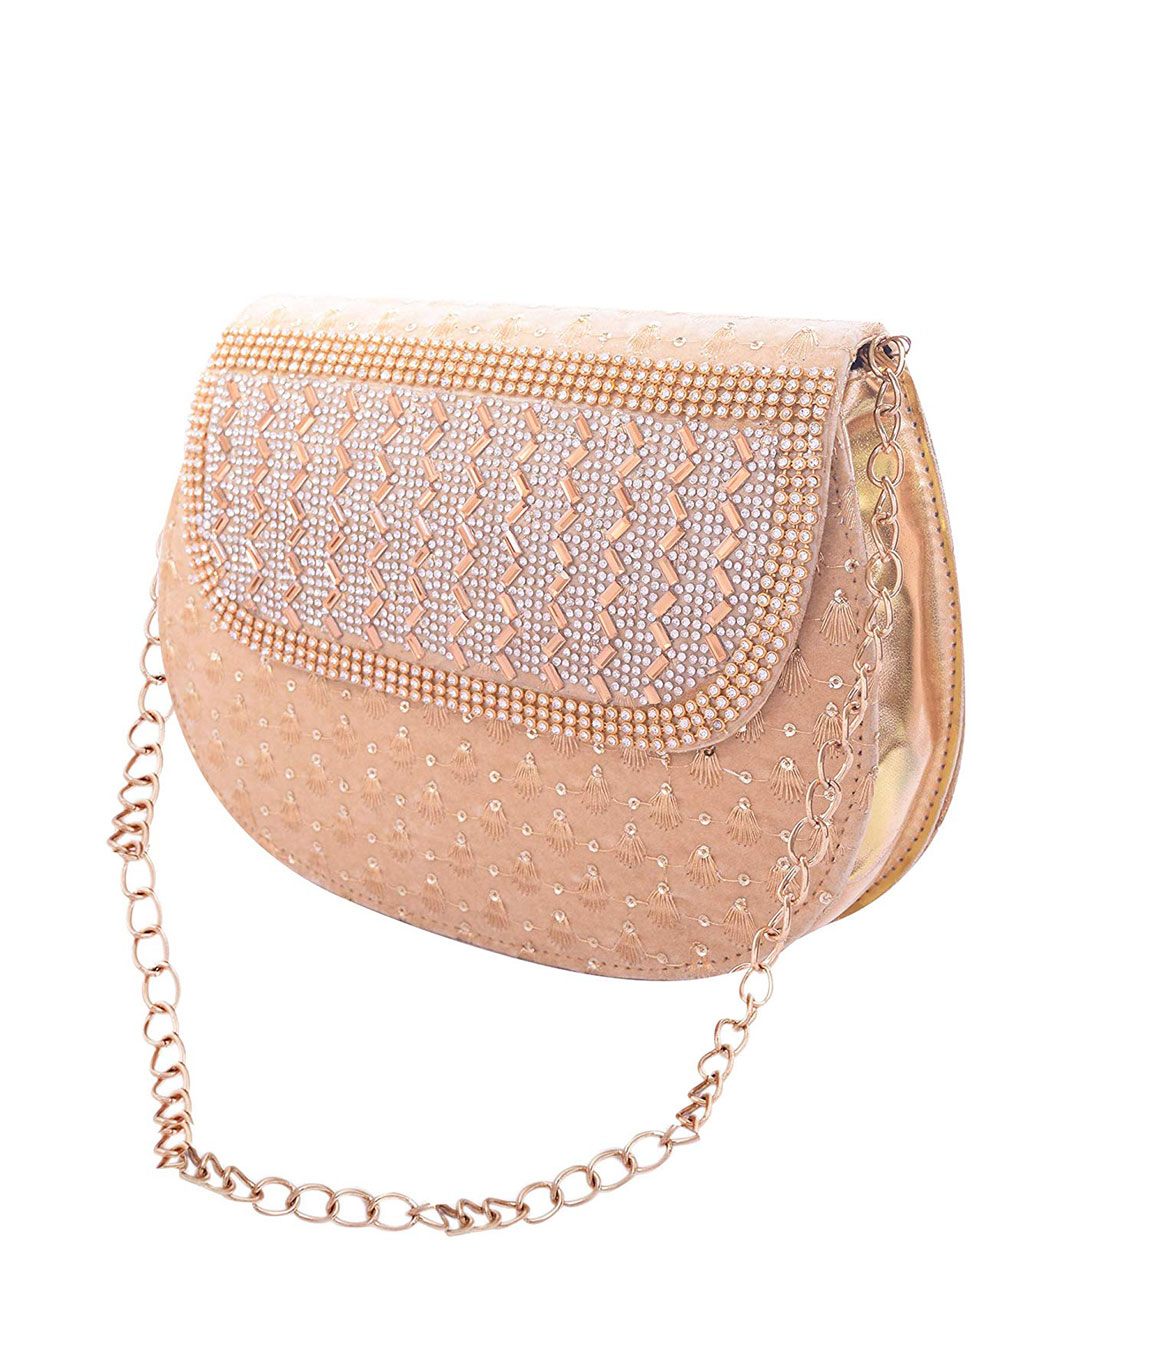 Buy Sakrit Collections Pink Attractive and classic in design ladies purse,  latest Trendy Fashion side Sling Handbag for Women and girls, Elegant and  Exotic woman purse, purse woman bag purse for woman